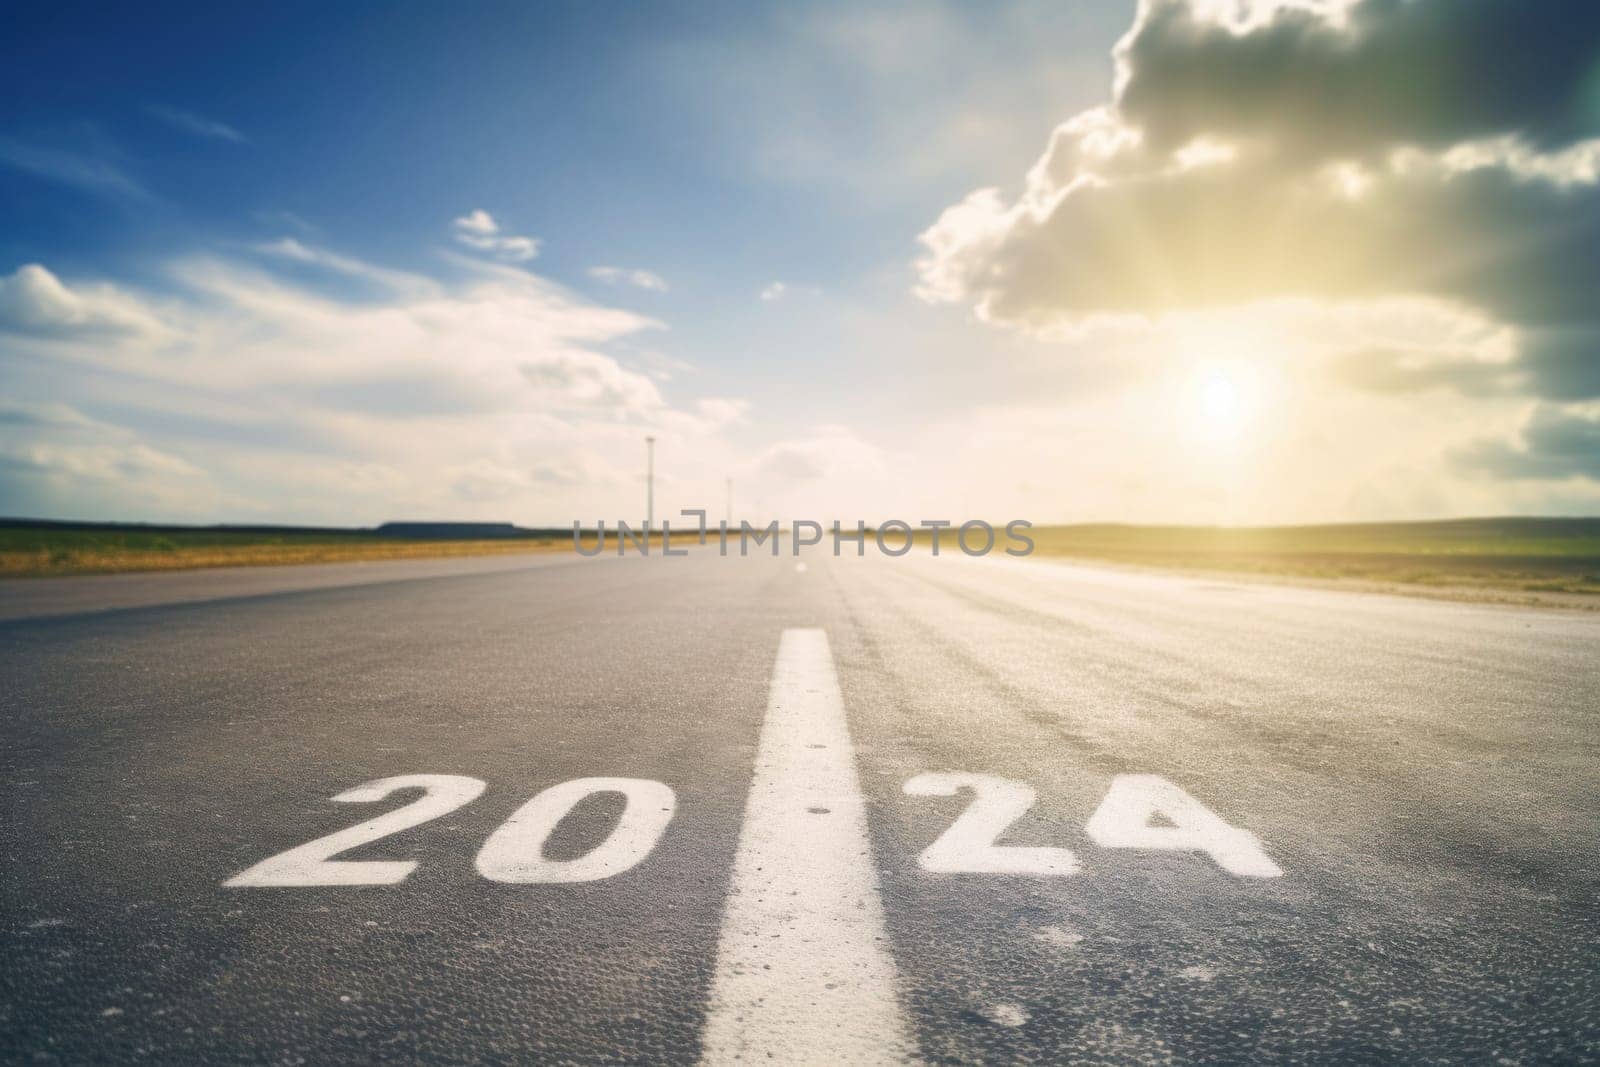 The new year 2024 or straightforward concept. Text 2024 written on the road.